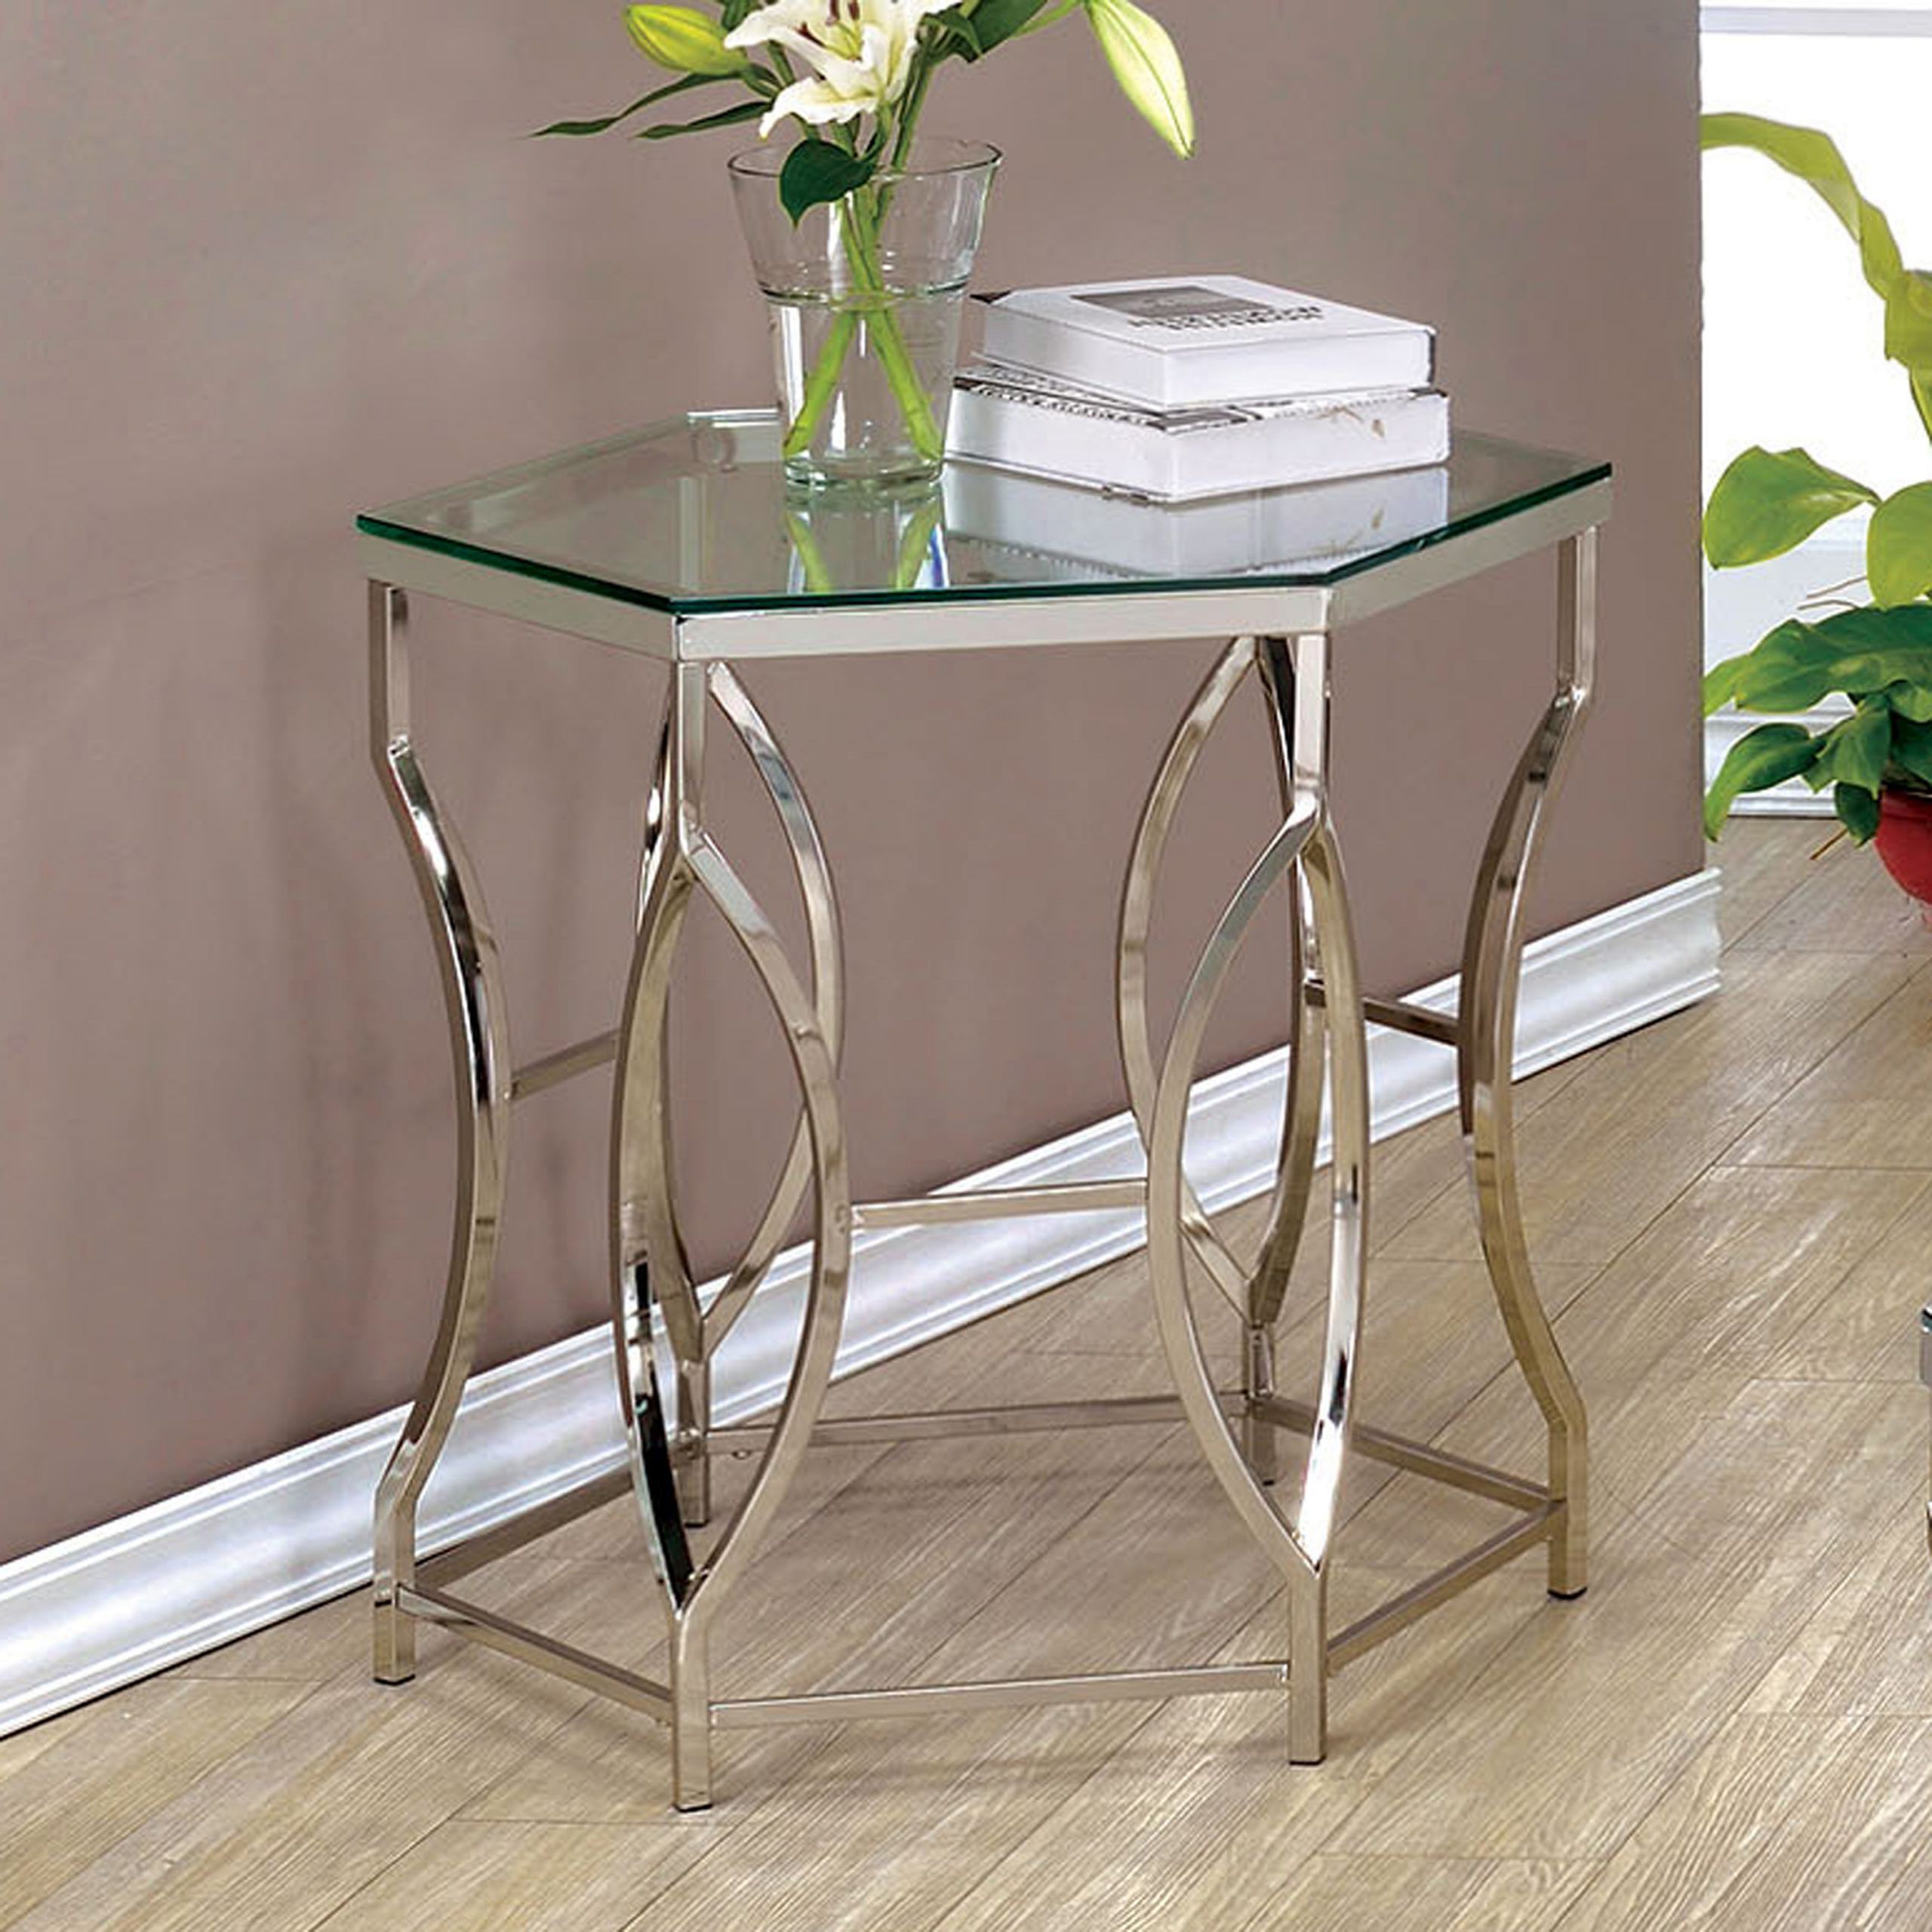 Trendy Furniture Of America Joslyn Contemporary Glass Top End Table, Chrome With Regard To Mirrored And Chrome Modern Cocktail Tables (View 8 of 10)